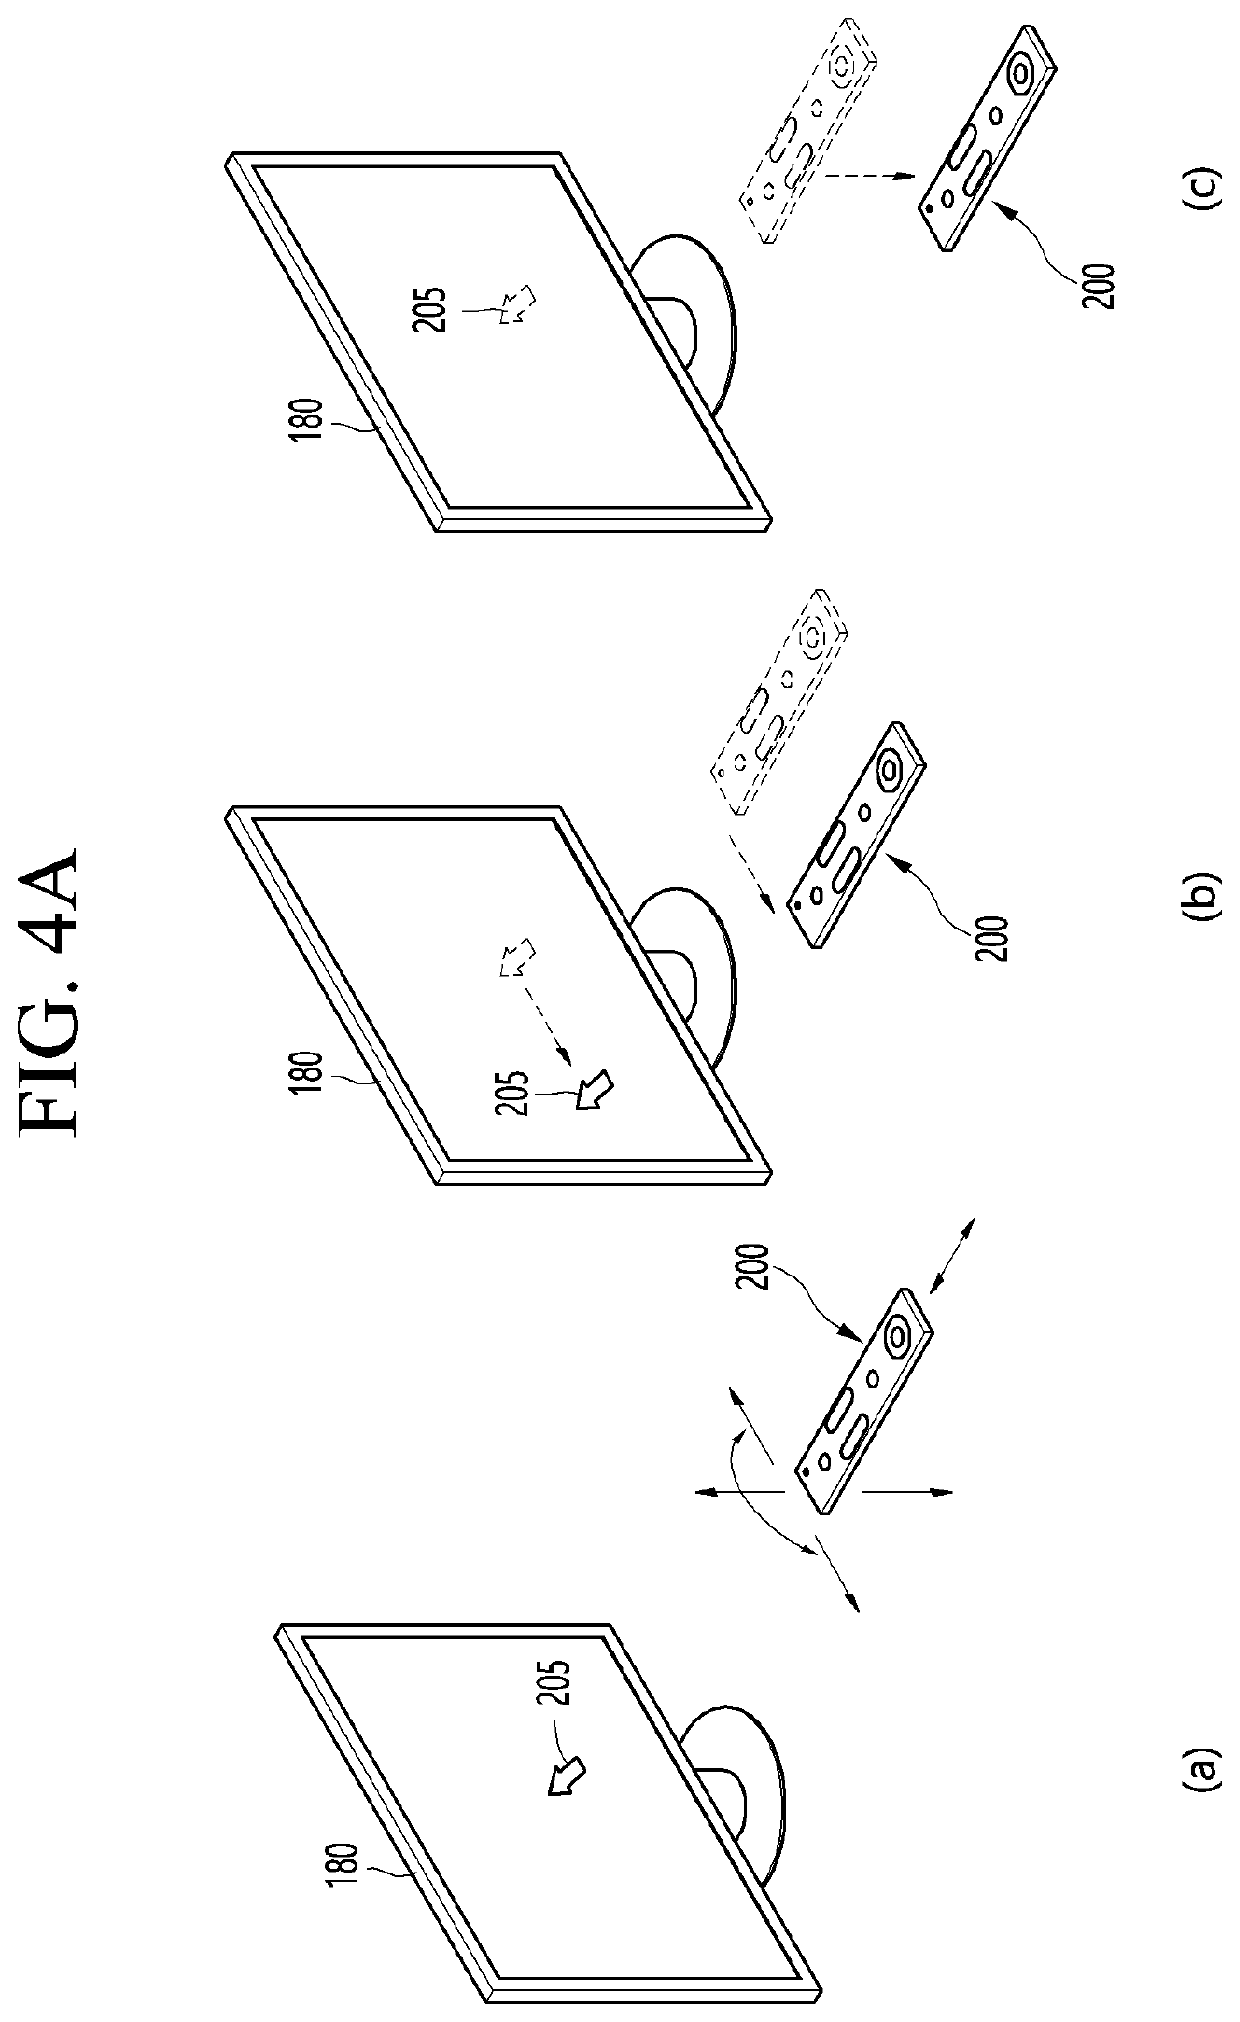 Display apparatus and operation method thereof